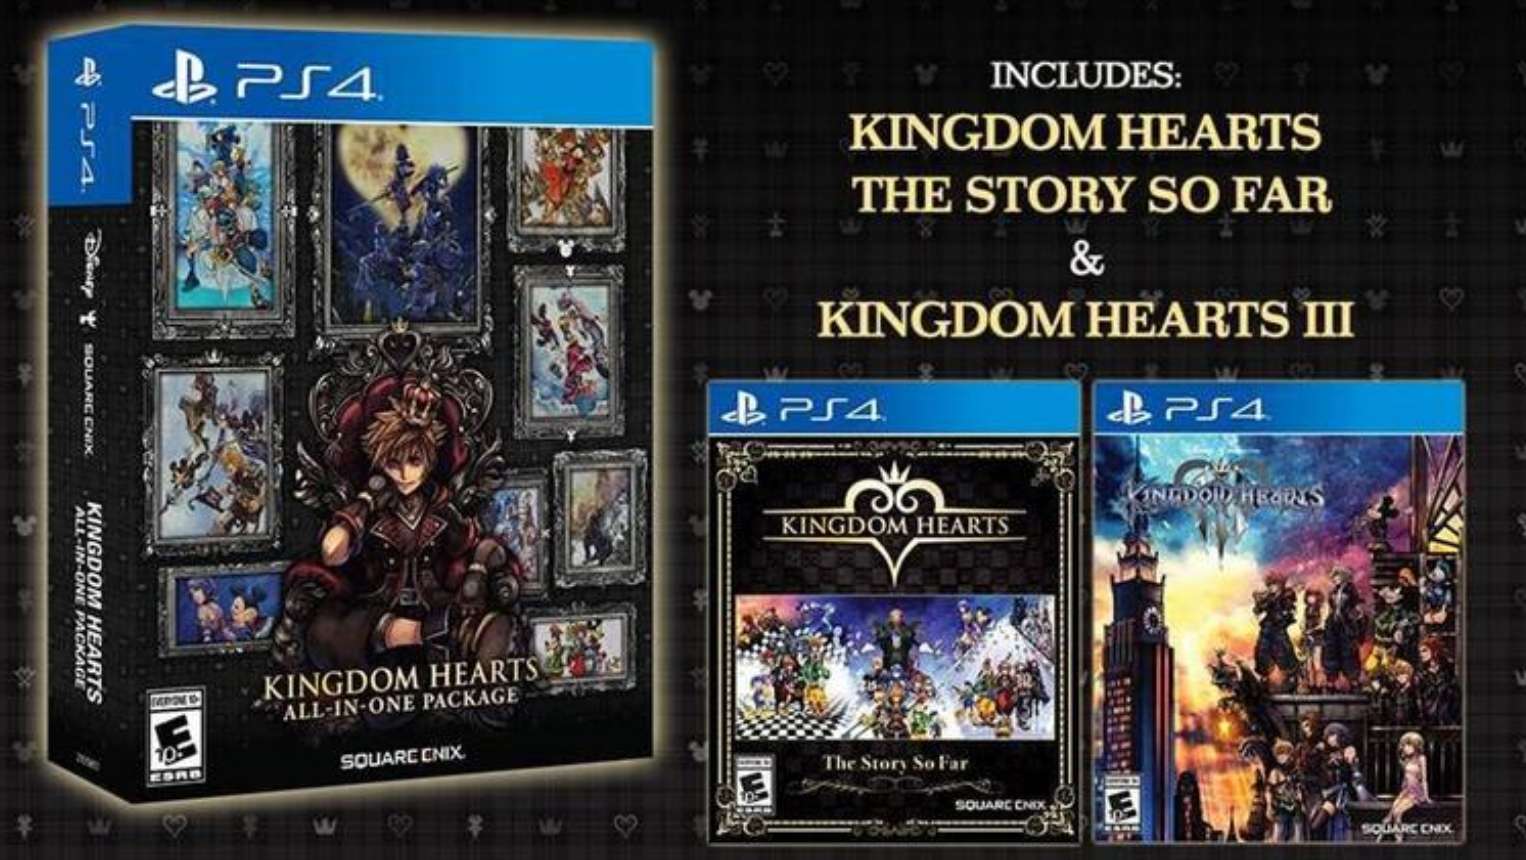 Kingdom Hearts All In One Package Features The Entire Series And Releases For The PS4 In March